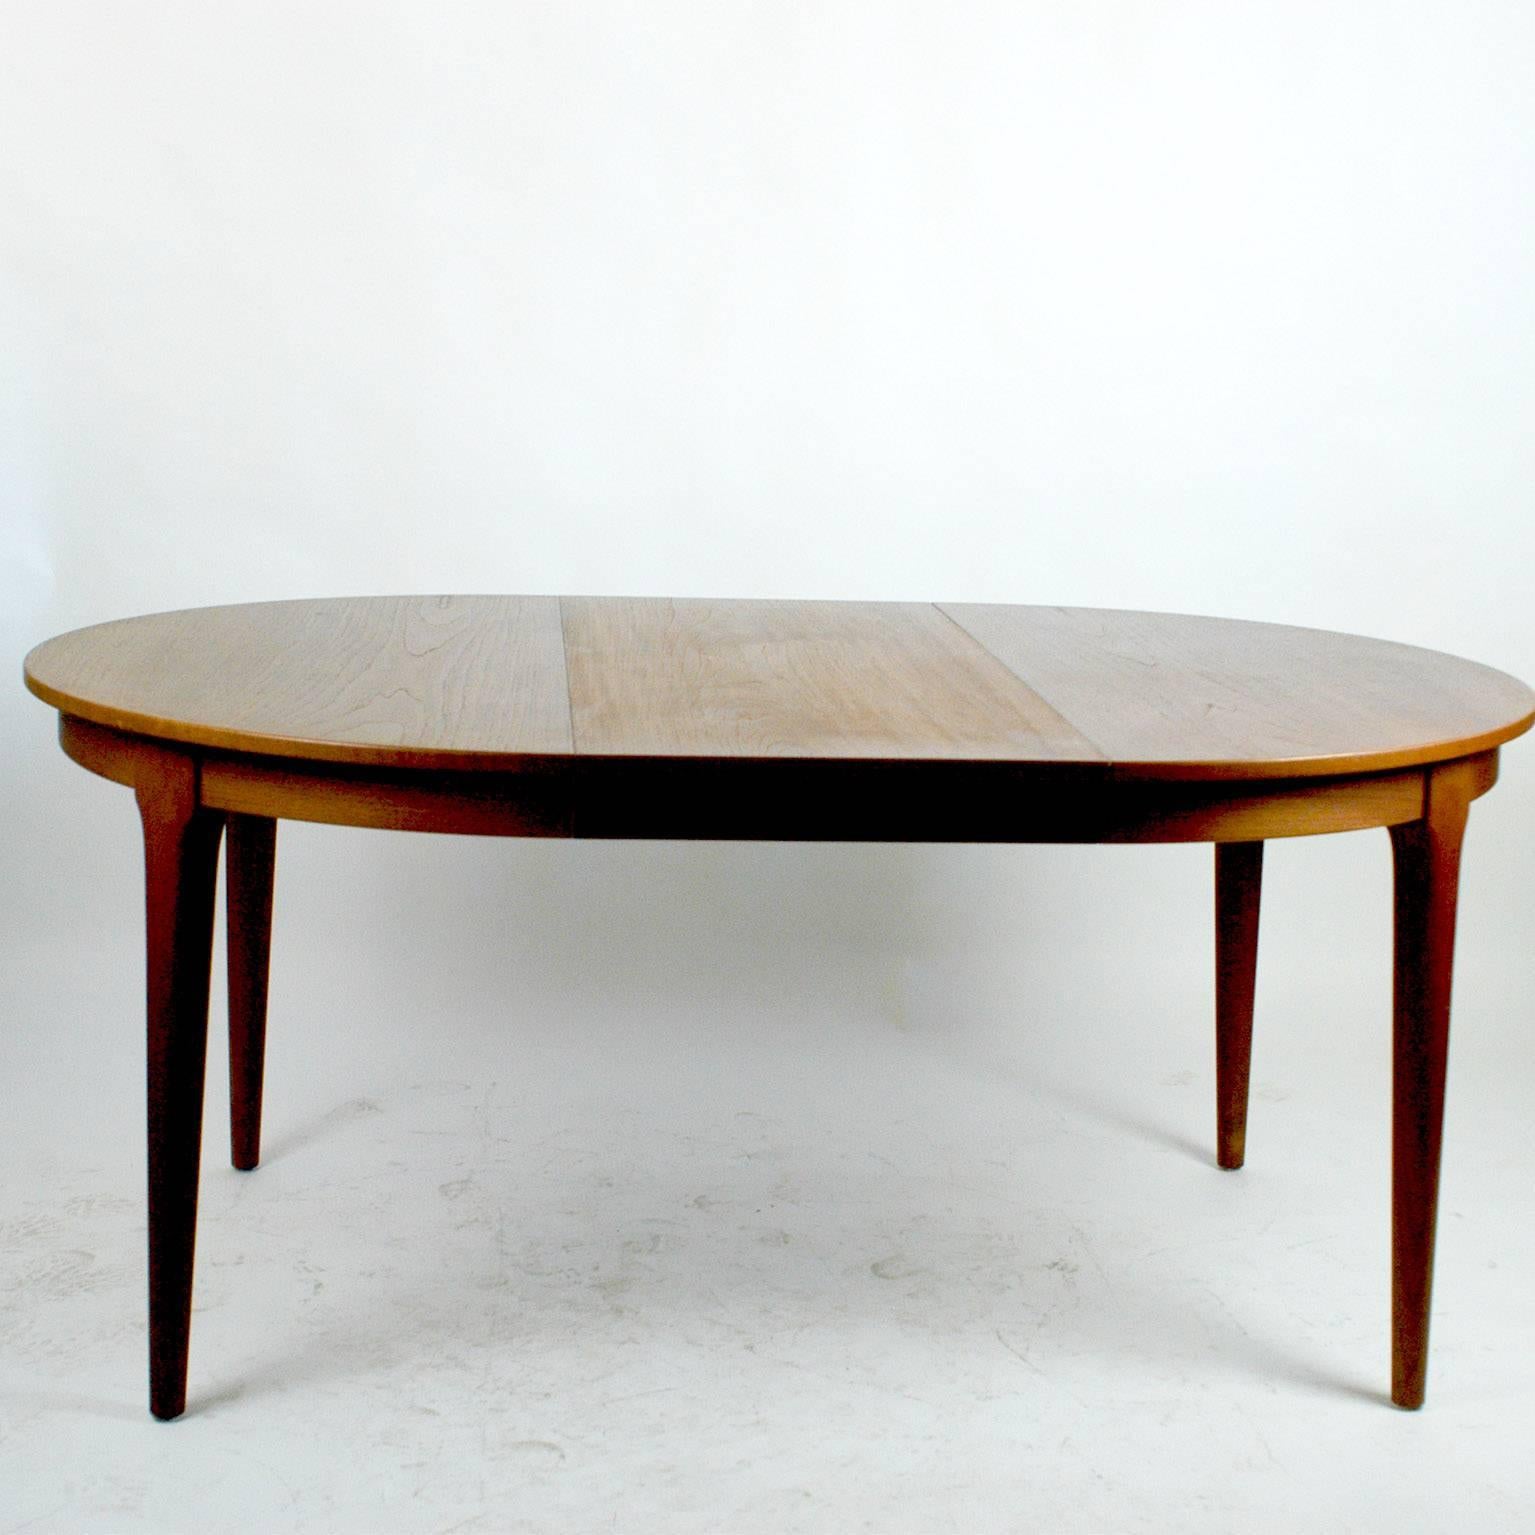 Excellent handcrafted extendable Danish teak dining table for up to eight persons. Manufacturers mark on the ubderside.